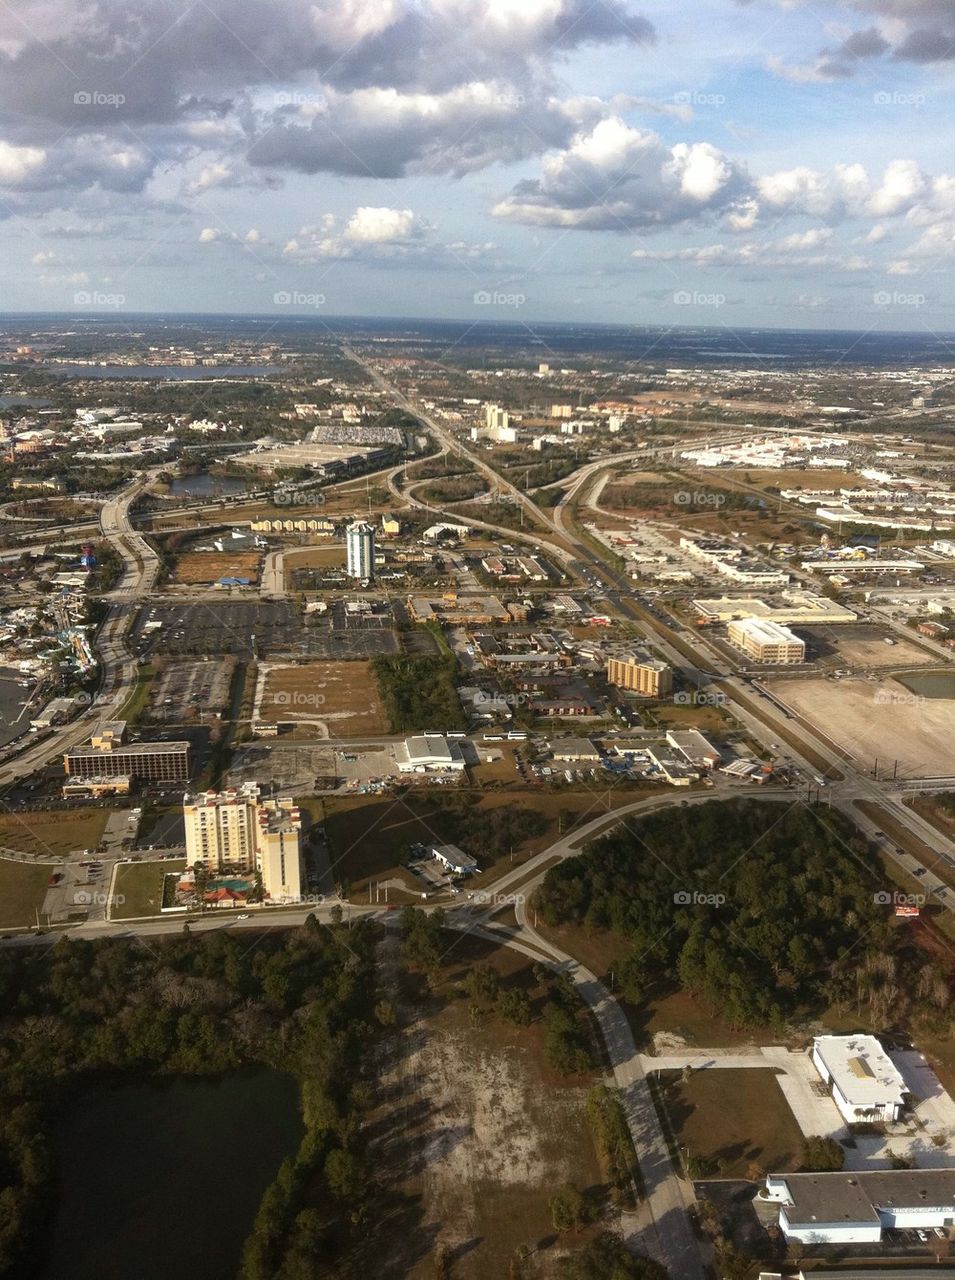 Orlando from a Helicopter